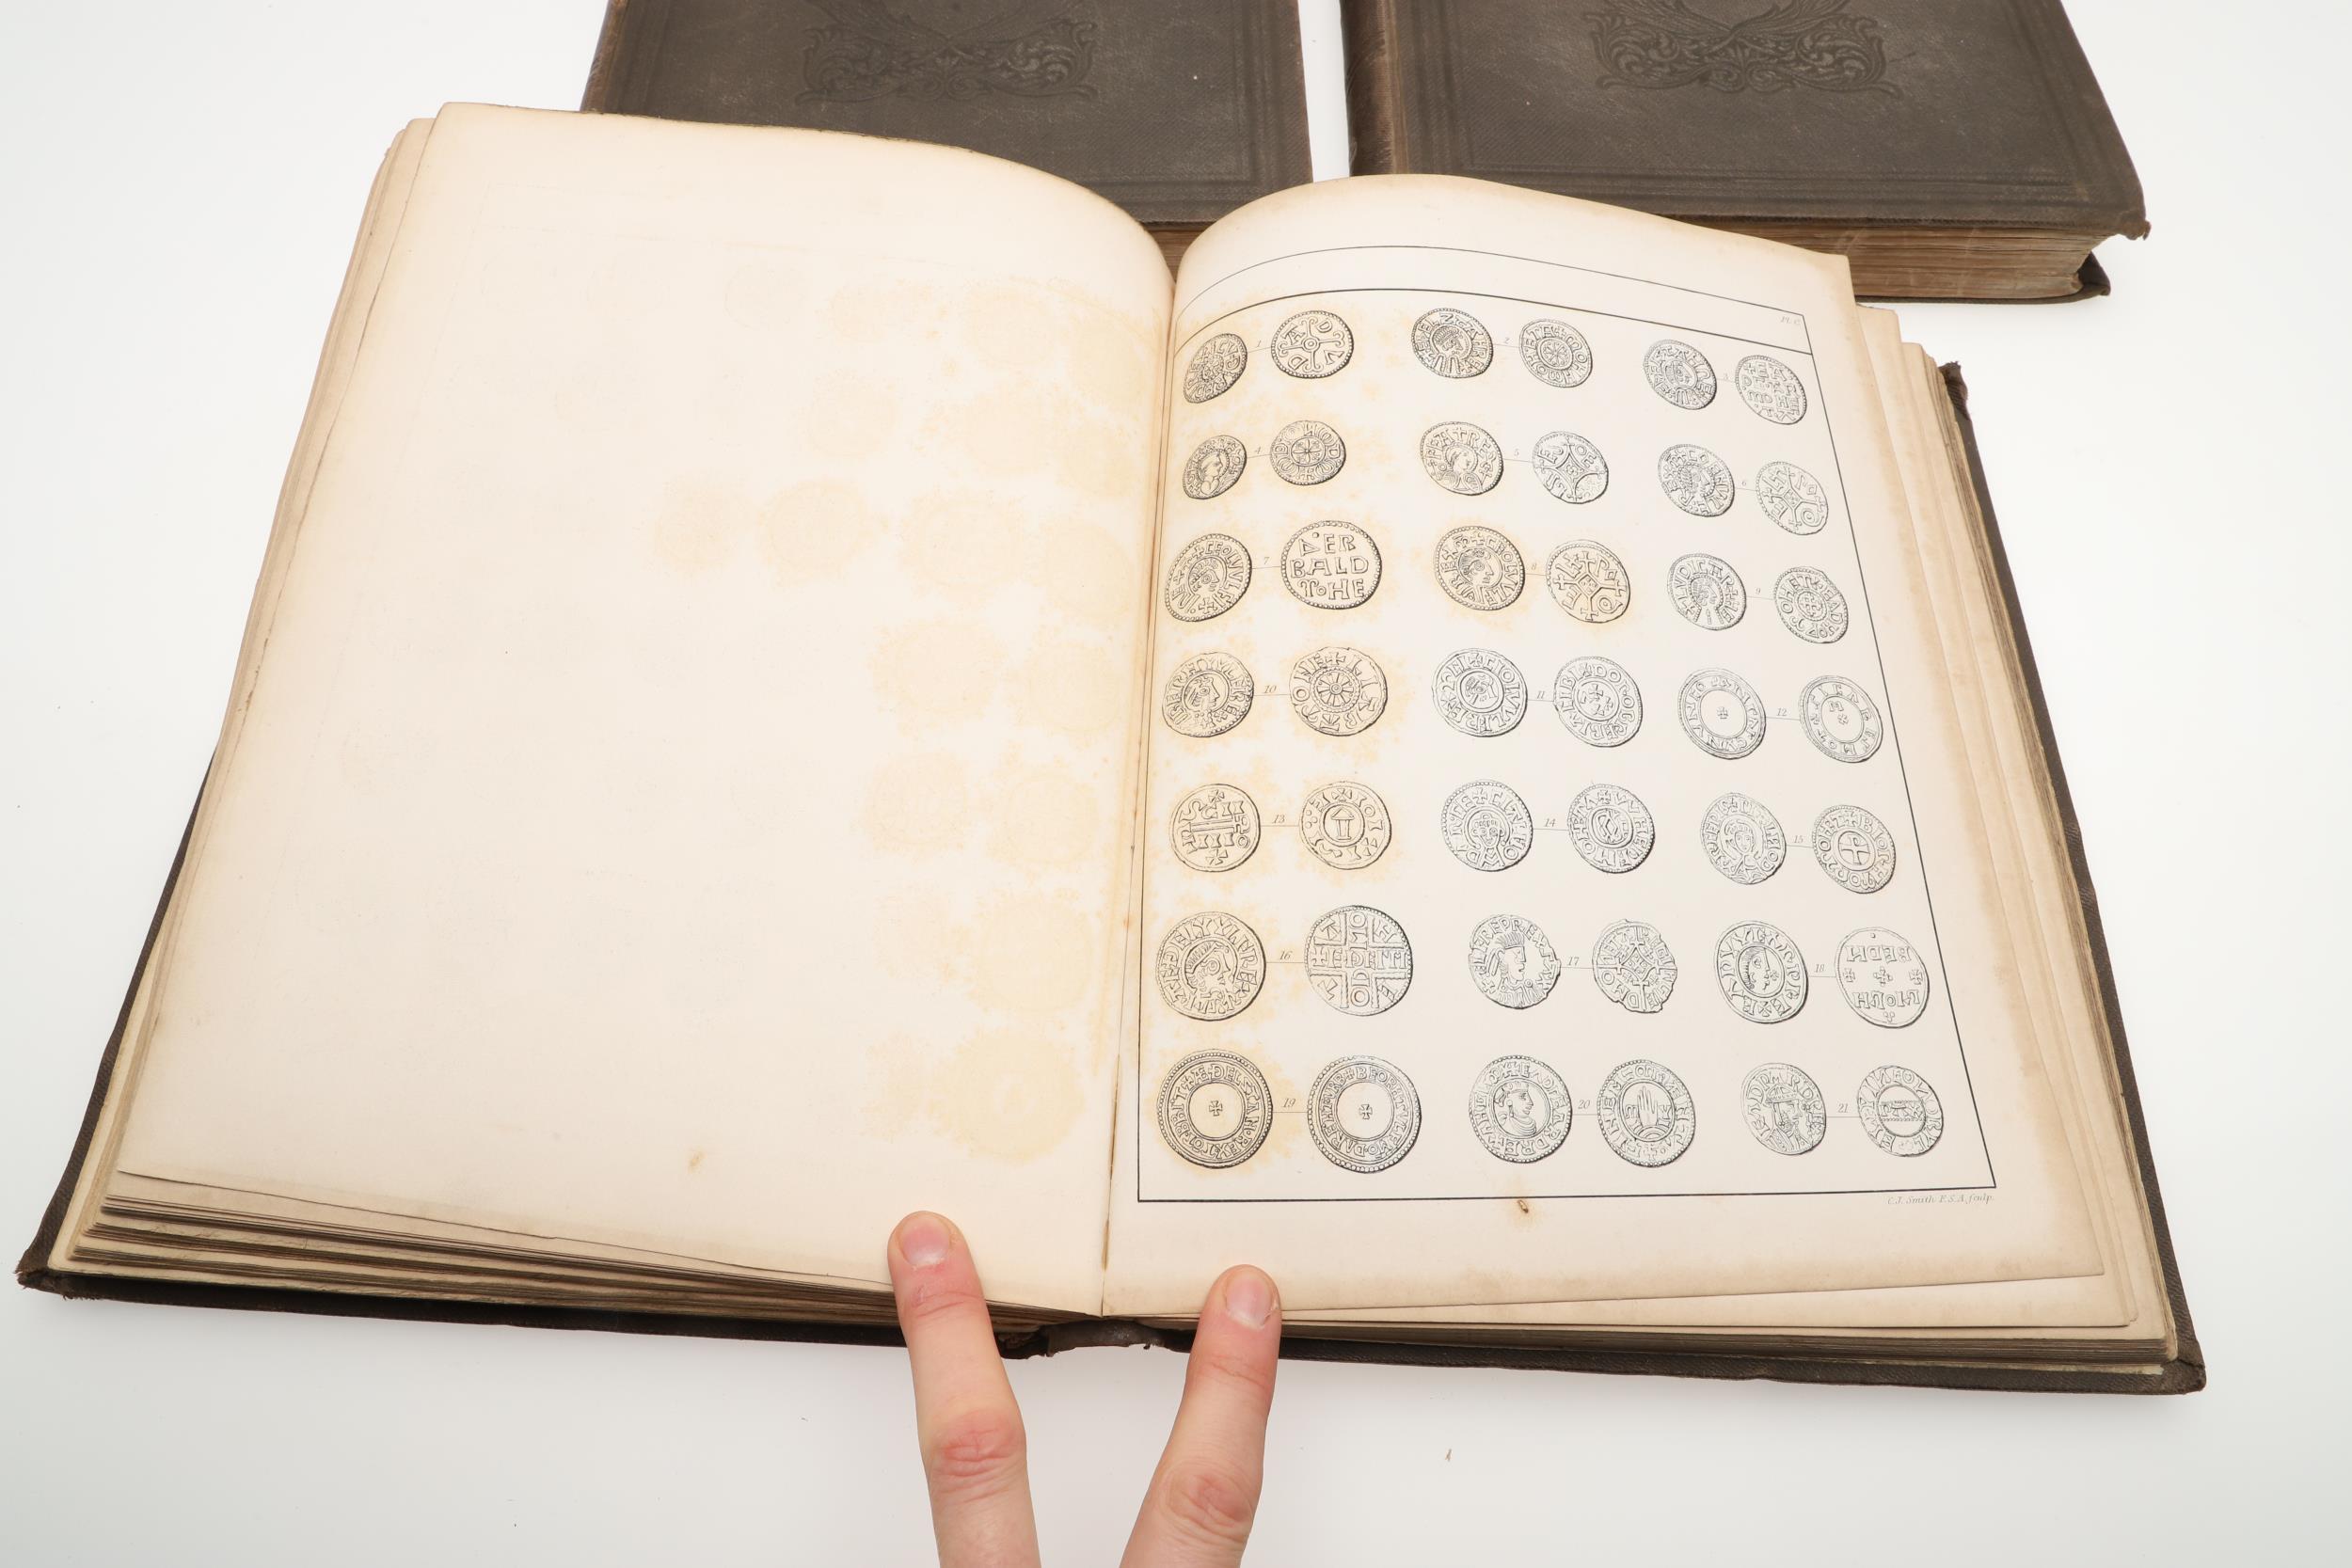 ANNALS OF THE COINAGE OF GREAT BRITAIN, 1840, THE REV. ROGERS RUDING. 3 VOLUMES. - Image 7 of 10